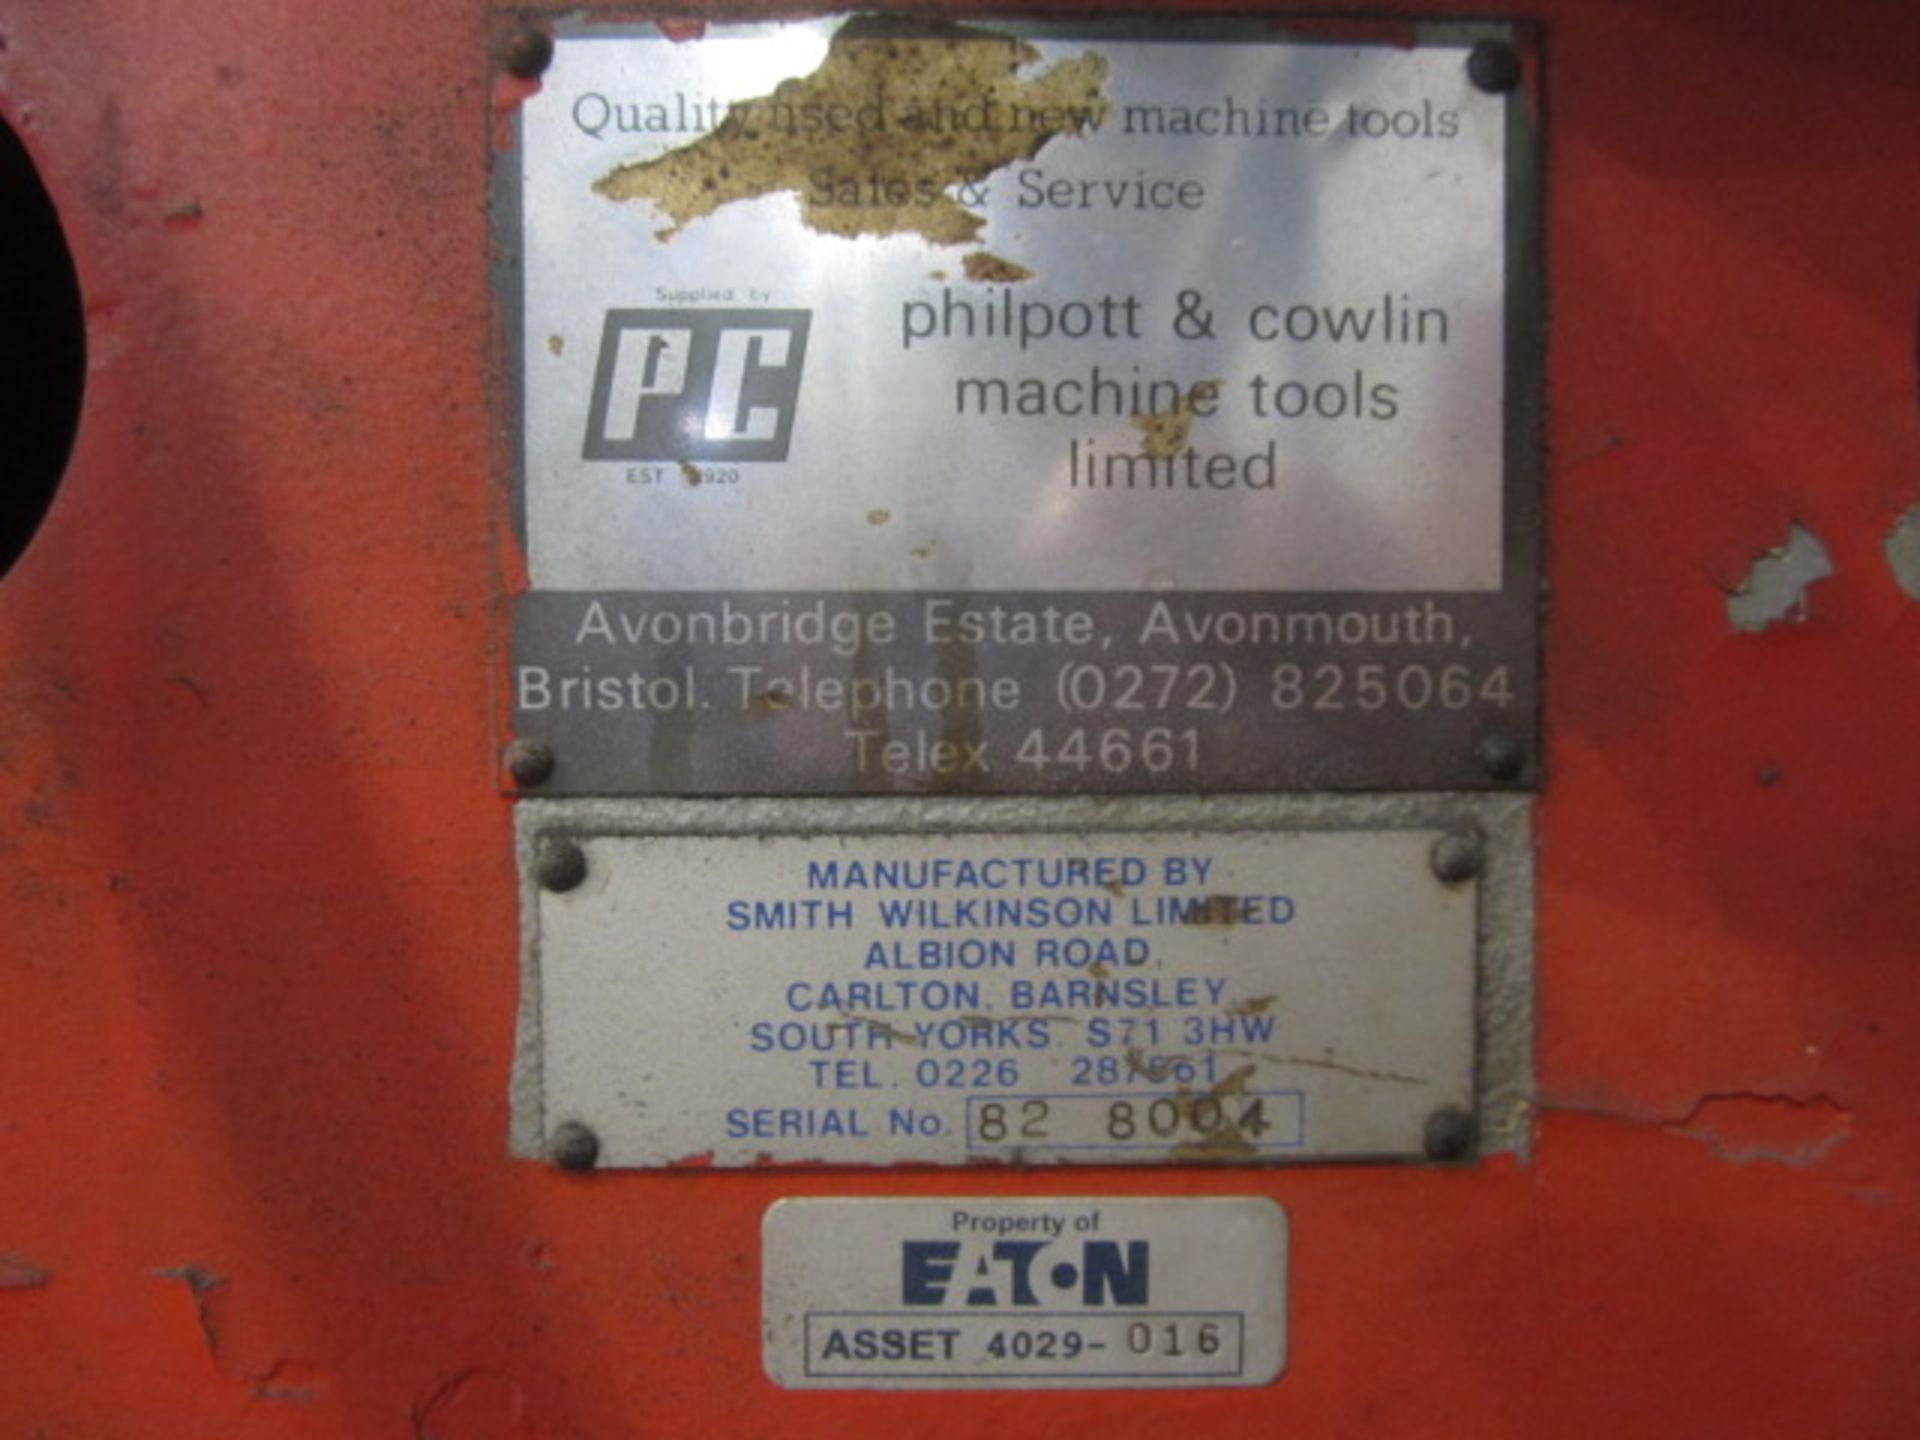 Smith Wilkinson Ltd manually operated X, Y, Z axis pillar drill, max rpm 2000, serial no. 82 8004, , - Image 6 of 11